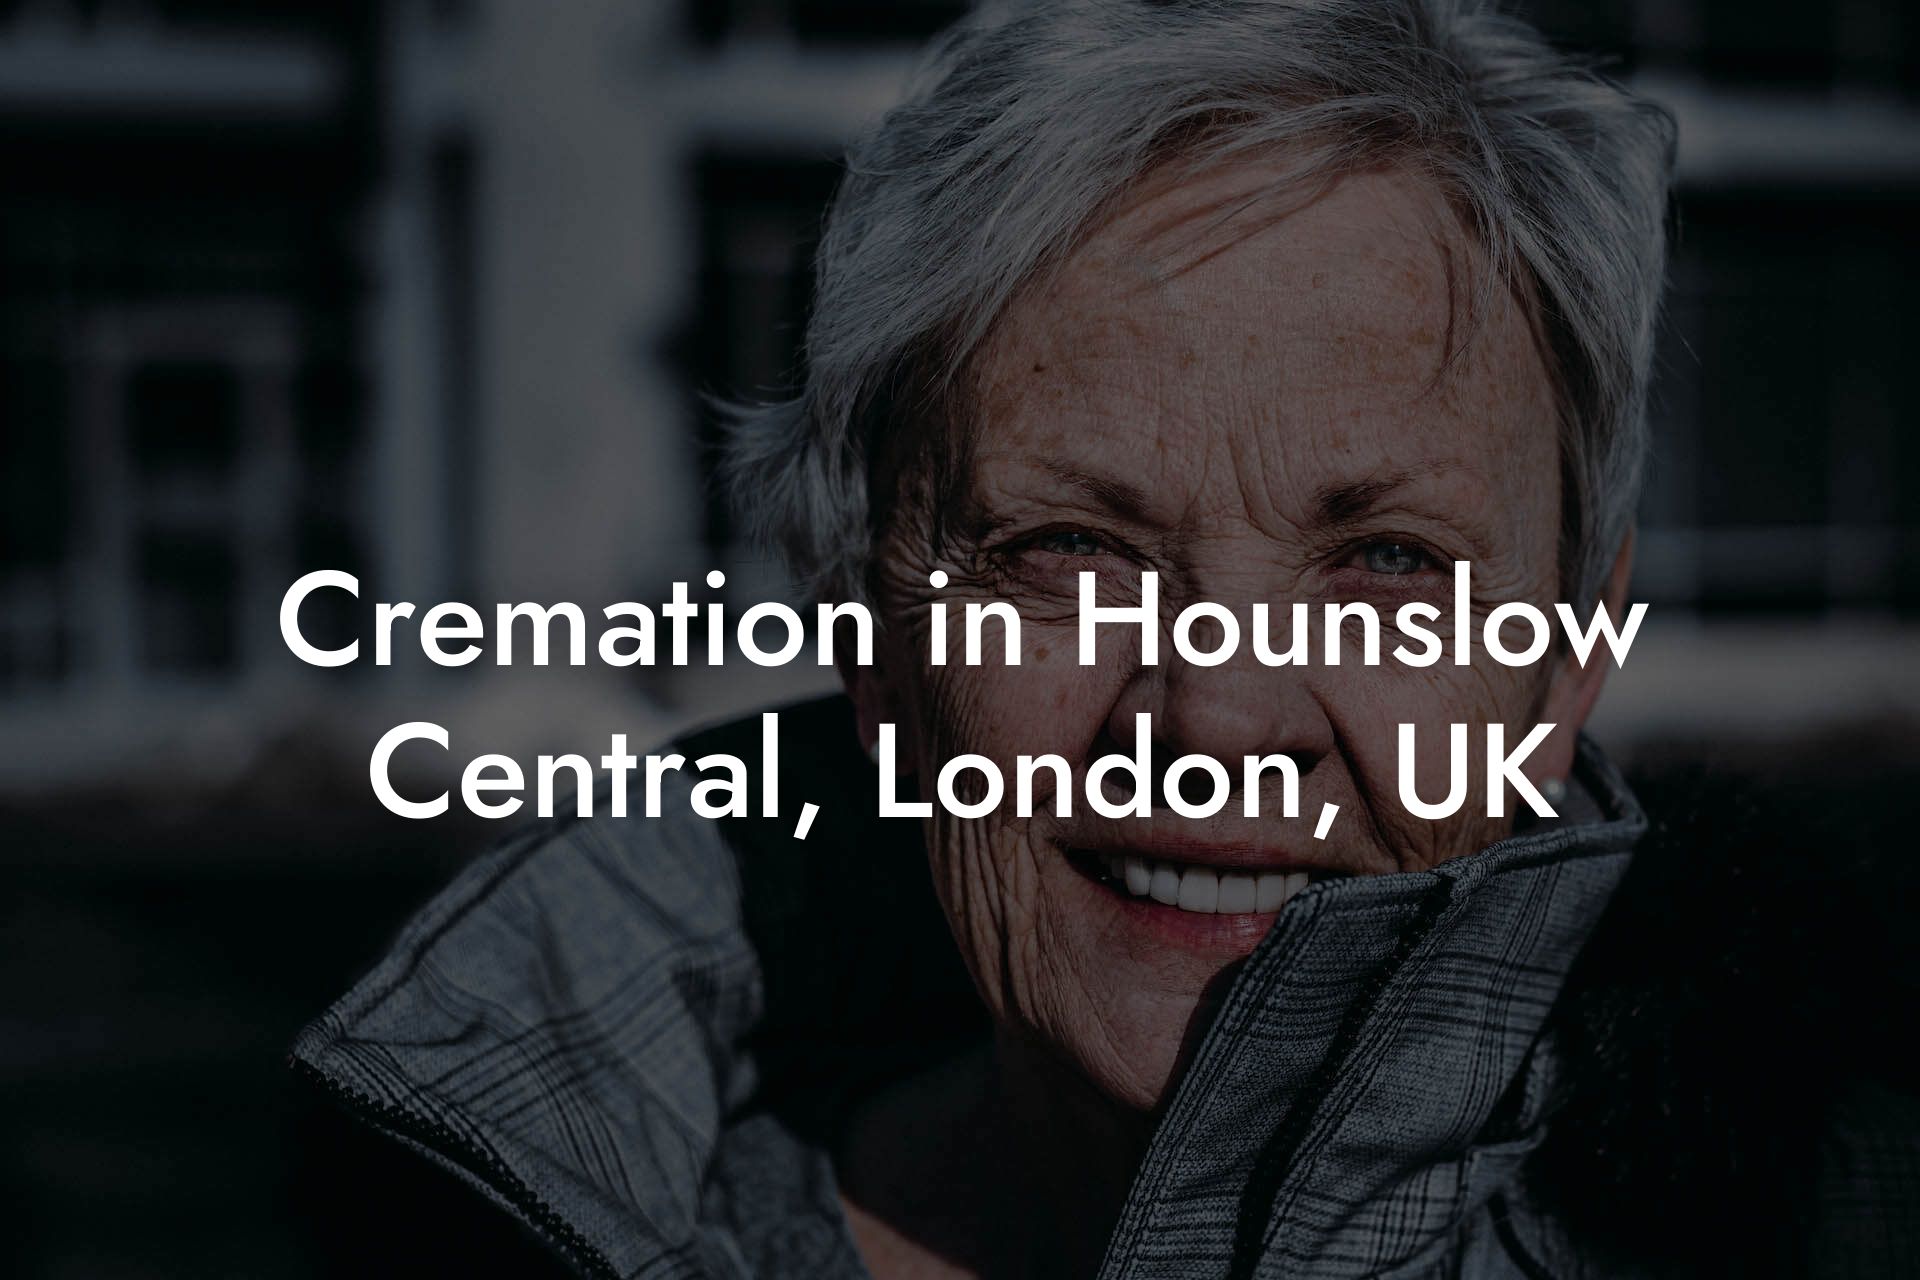 Cremation in Hounslow Central, London, UK